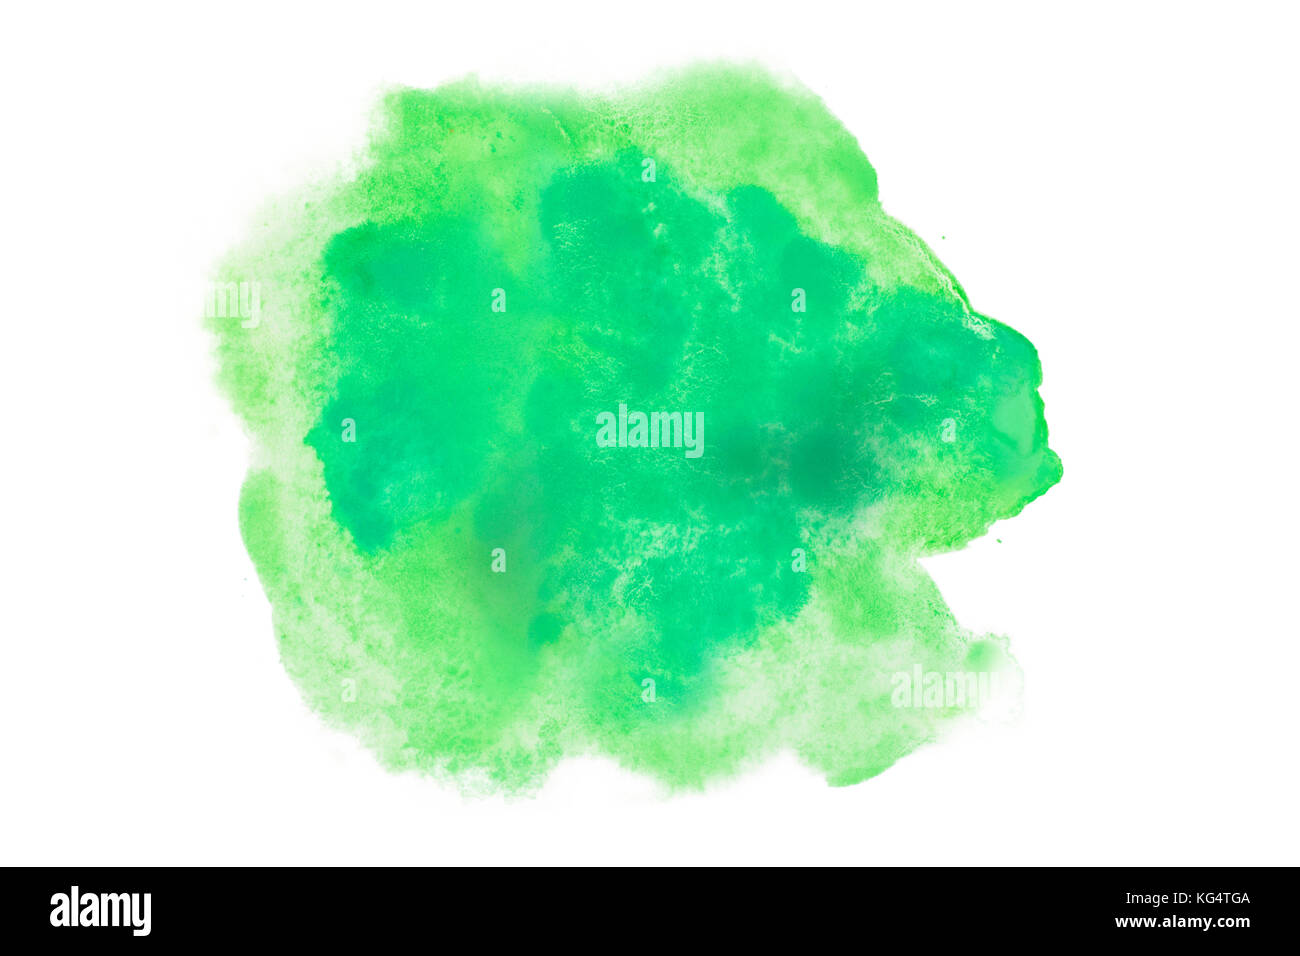 Color, green splash watercolor hand painted isolated on white background, artistic decoration or background Stock Photo